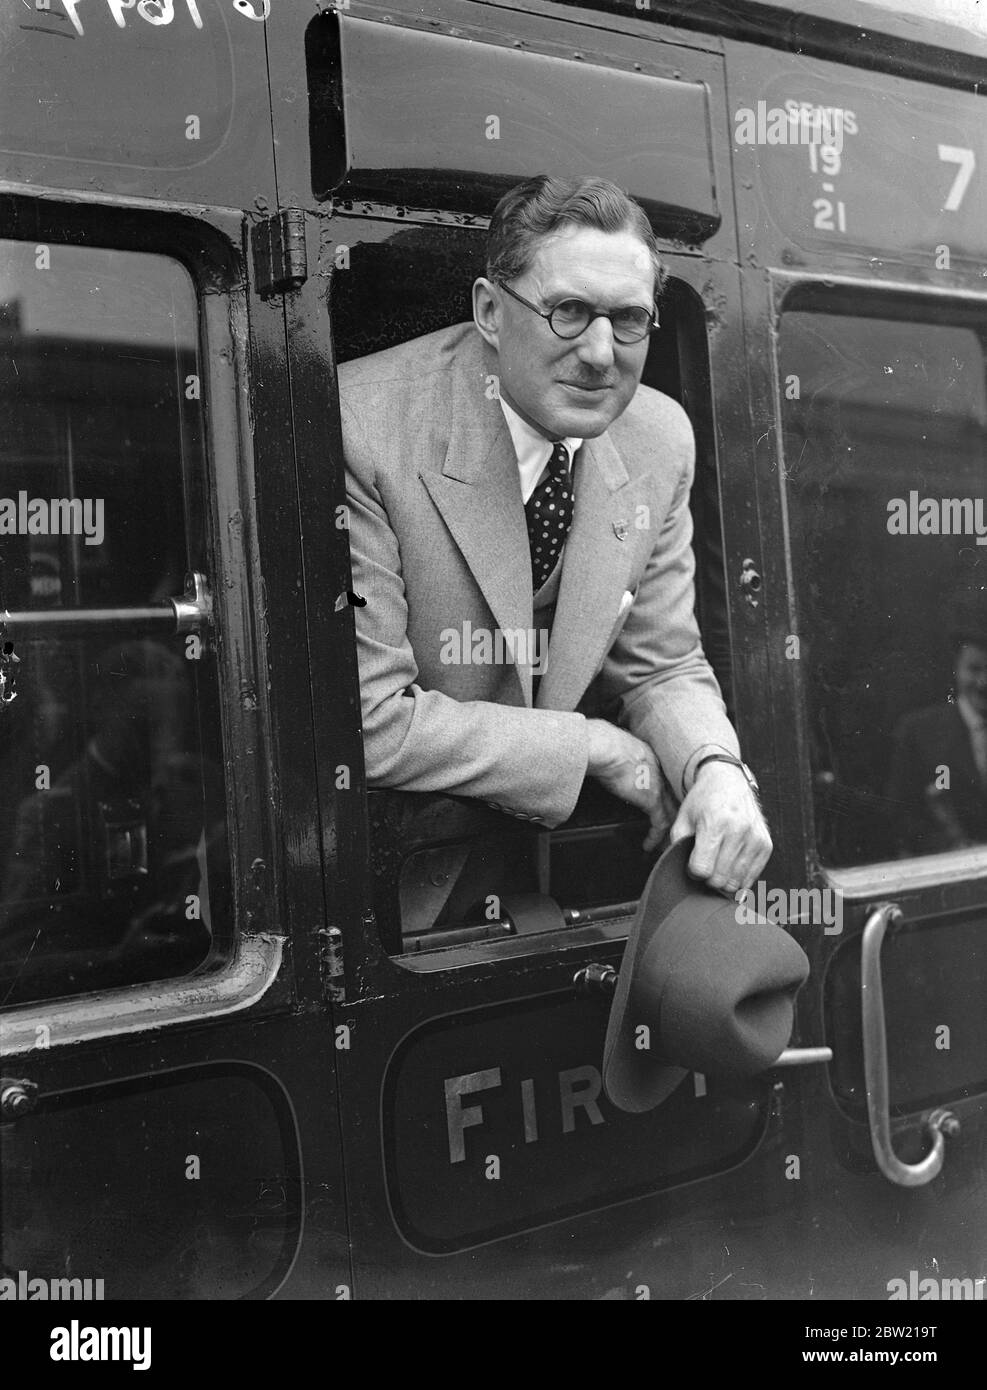 Captain Eyston in his carriage window, who is shortly to attempt to set a new world speed record of 400 miles an hour. They left Waterloo station with his wife and daughters, Madelyn and Betty on the Aquatania boat train for America. 25 August 1937 Stock Photo